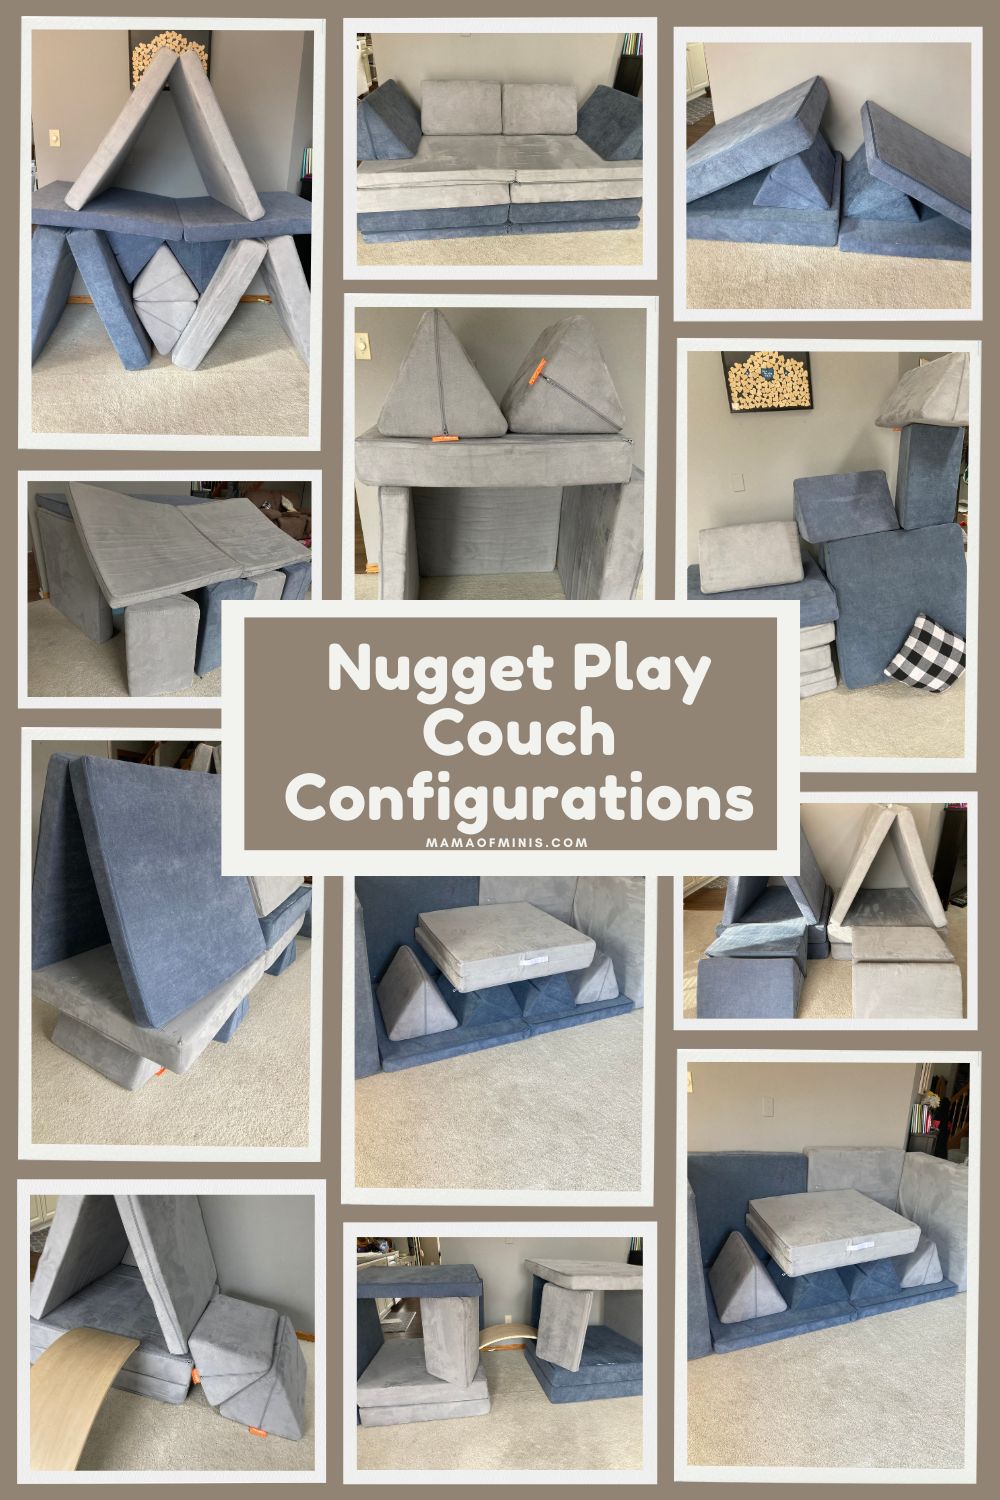 Nugget Play Couch Configurations